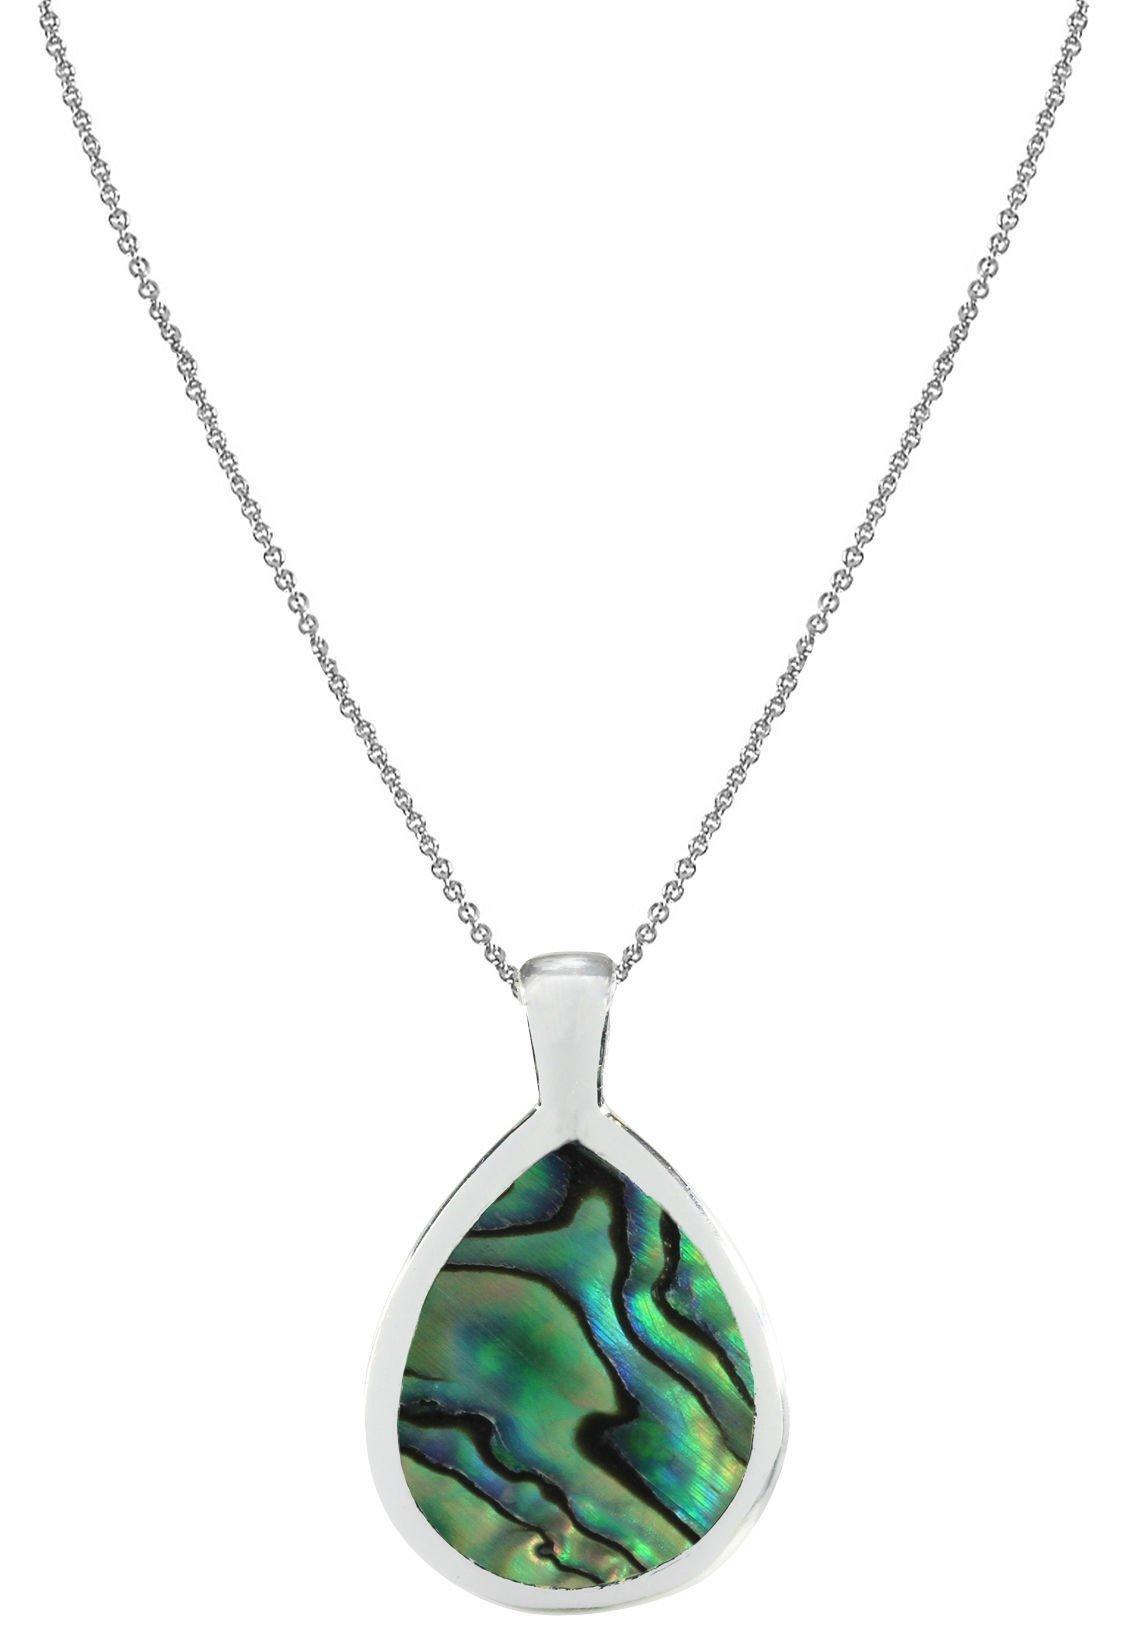 Beach Chic Silver Plated Abalone Teardrop Pendant Necklace